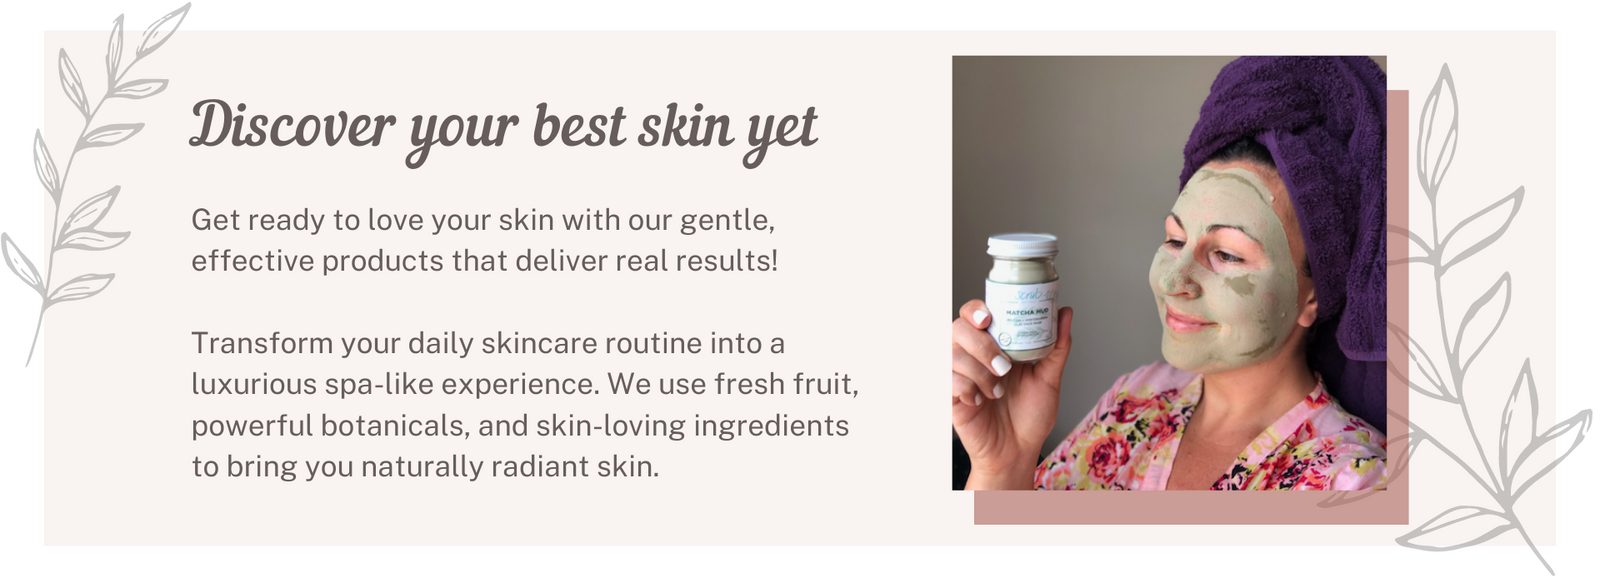 Discover your healthy radiant skin, natural skin care products by Scrub Inspired - Shop by skin type